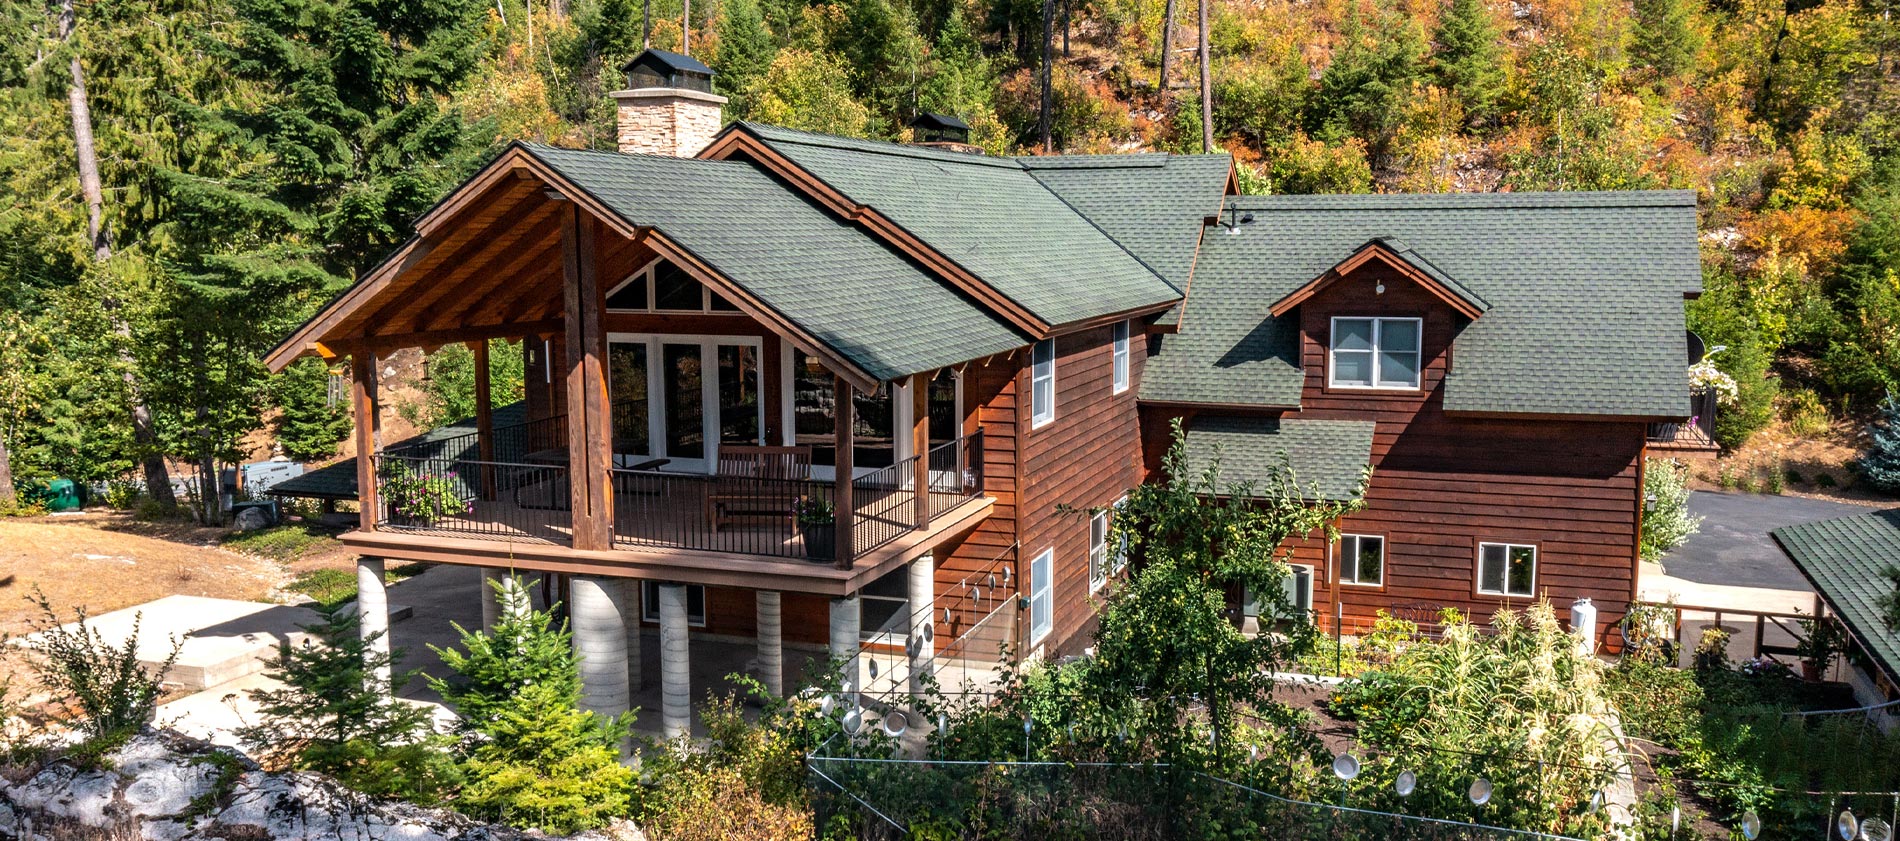 One-of-a-kind custom home on 13 acres (2 separate lots) overlooking the pristine waters of Priest Lake